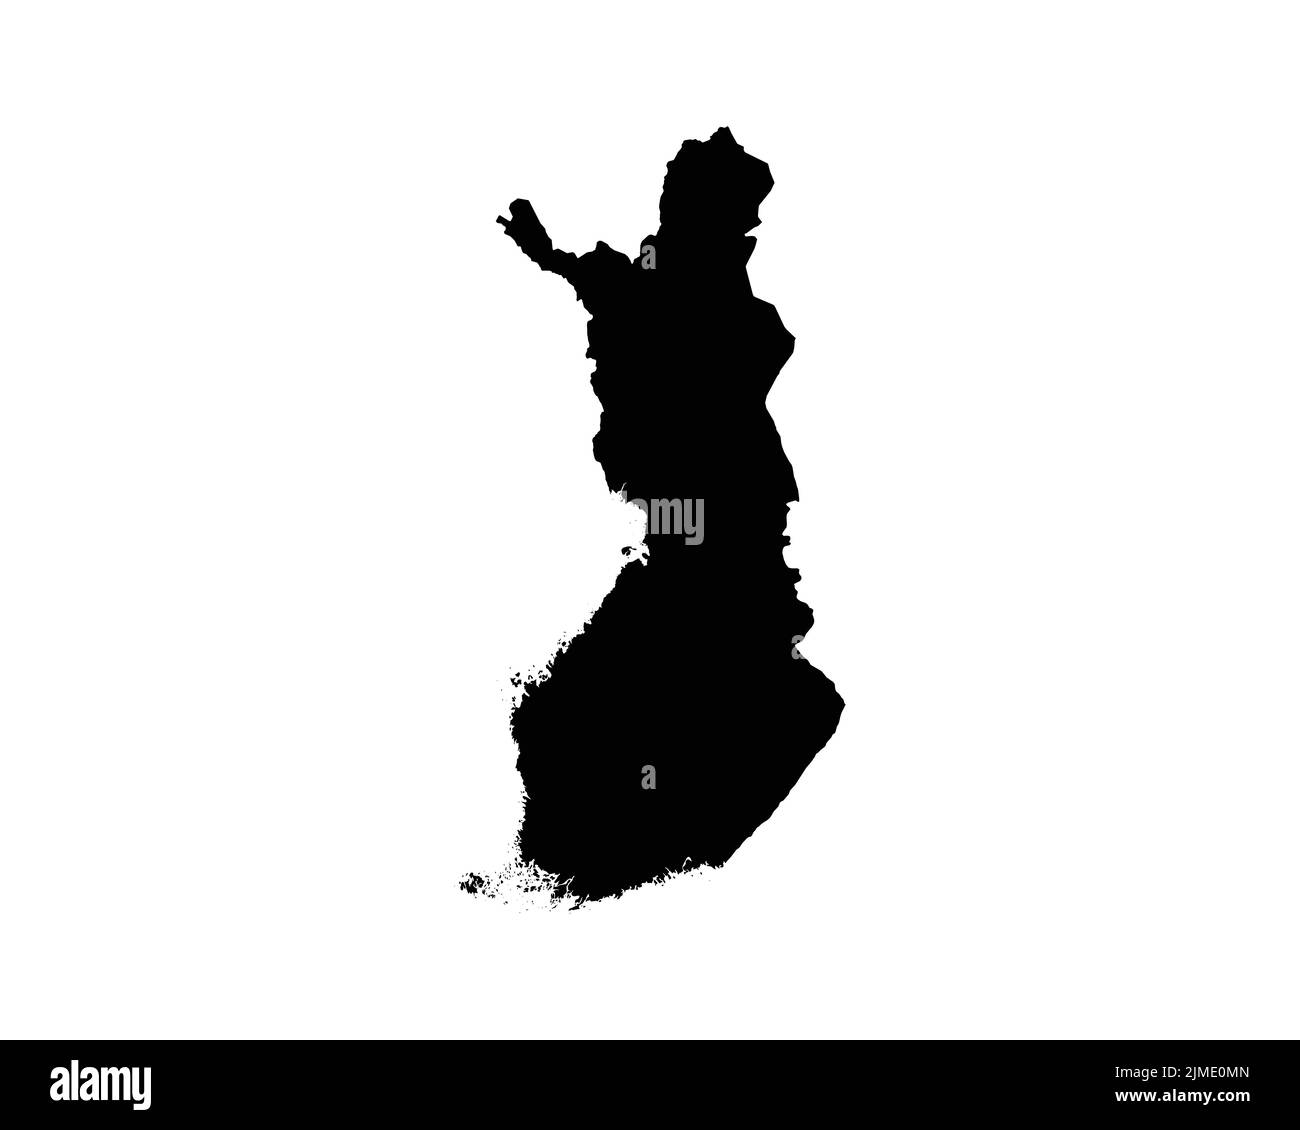 Finland Map. Finnish Country Map. Finn Black and White National Nation Outline Geography Border Boundary Shape Territory Vector Illustration EPS Clipa Stock Vector